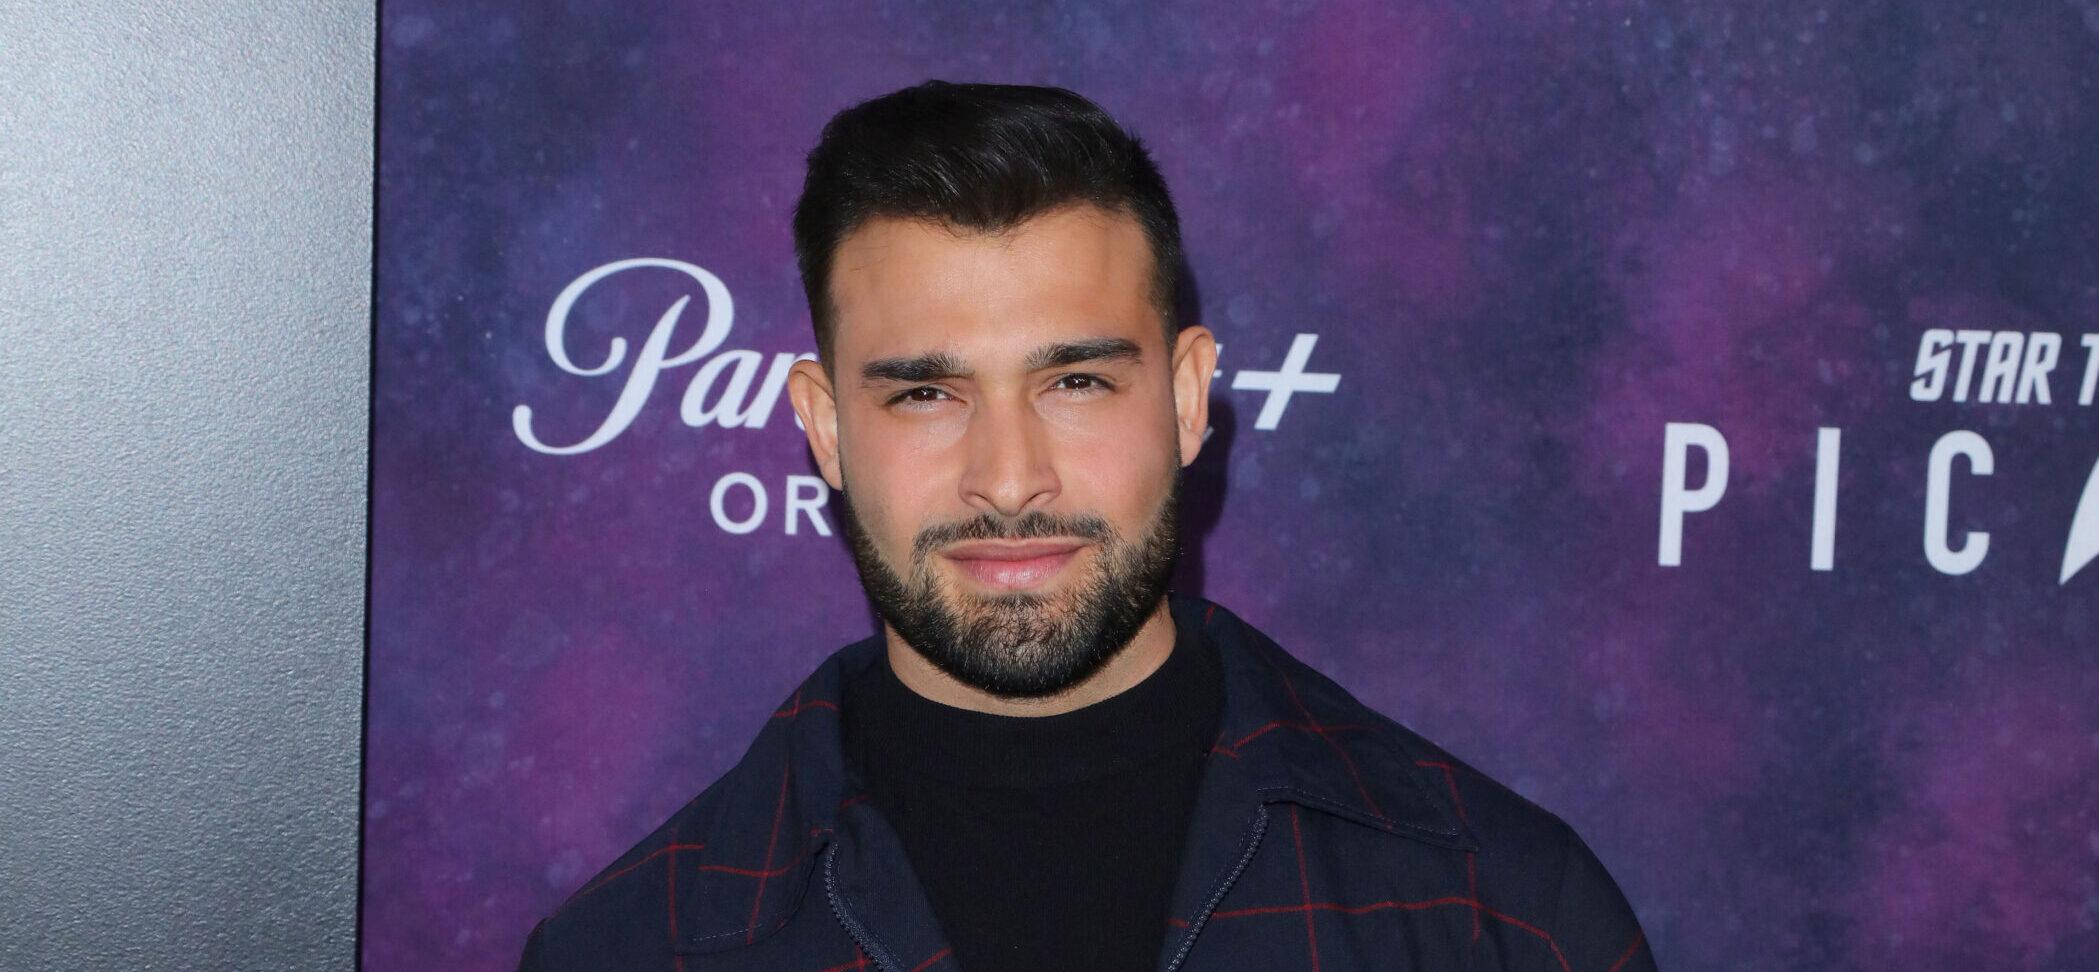 Where Britney Spears’ Ex Sam Asghari Stands On Using Ozempic